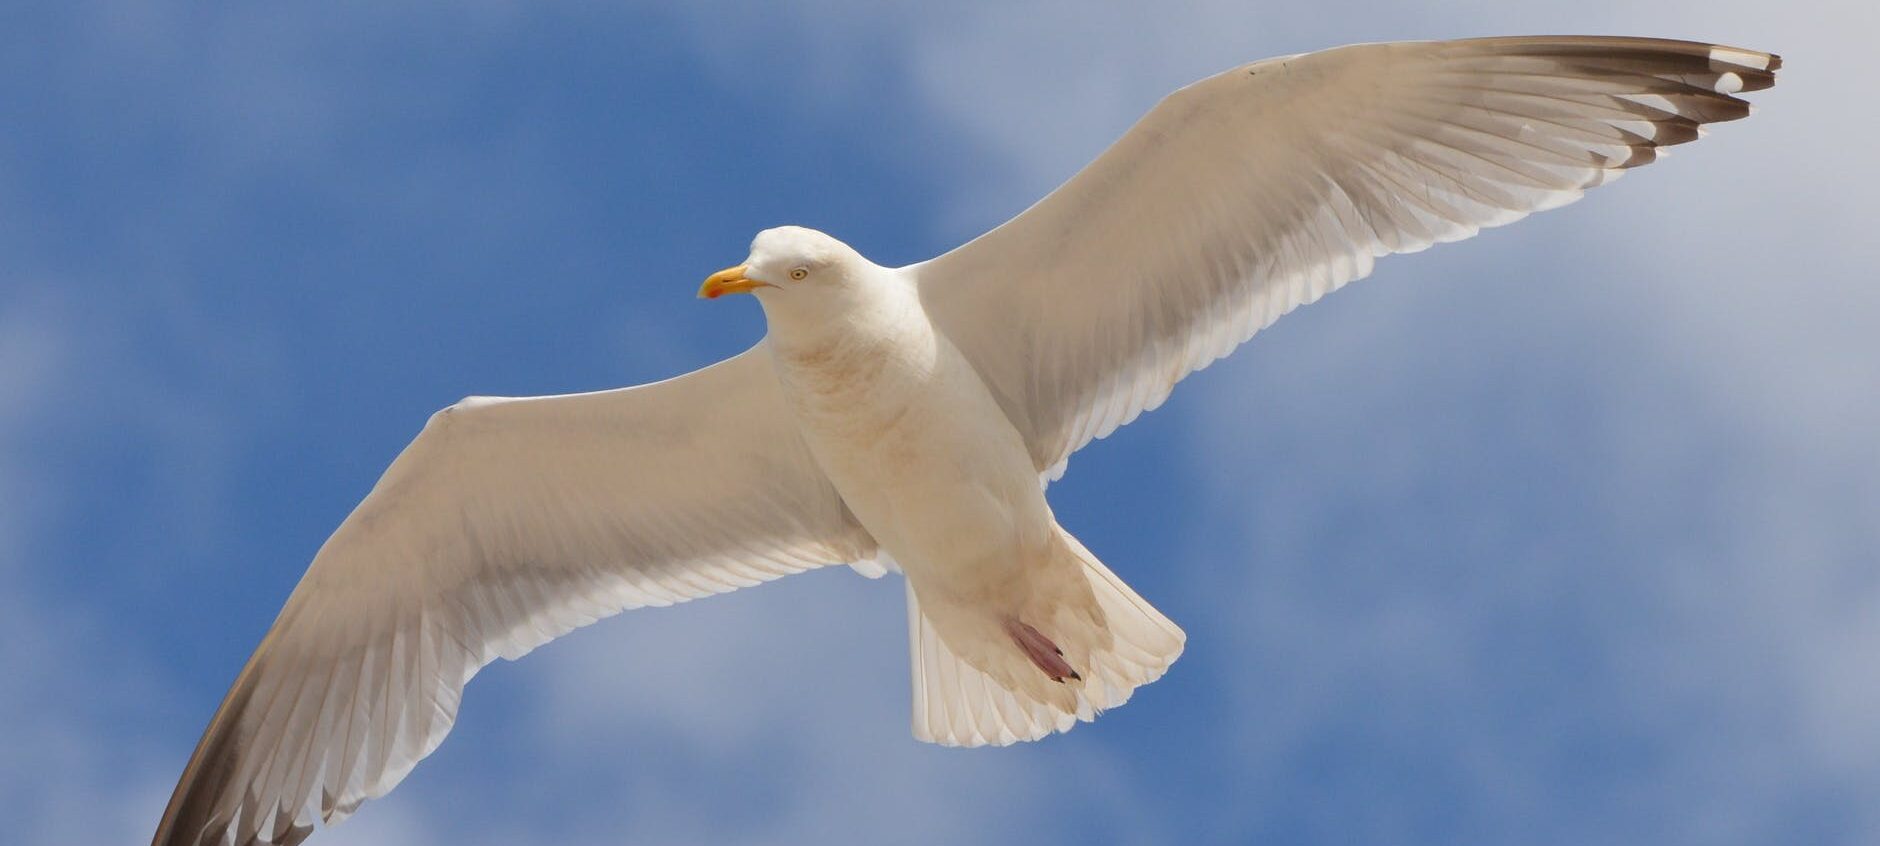 white bird flying under the blue and white sky during daytime